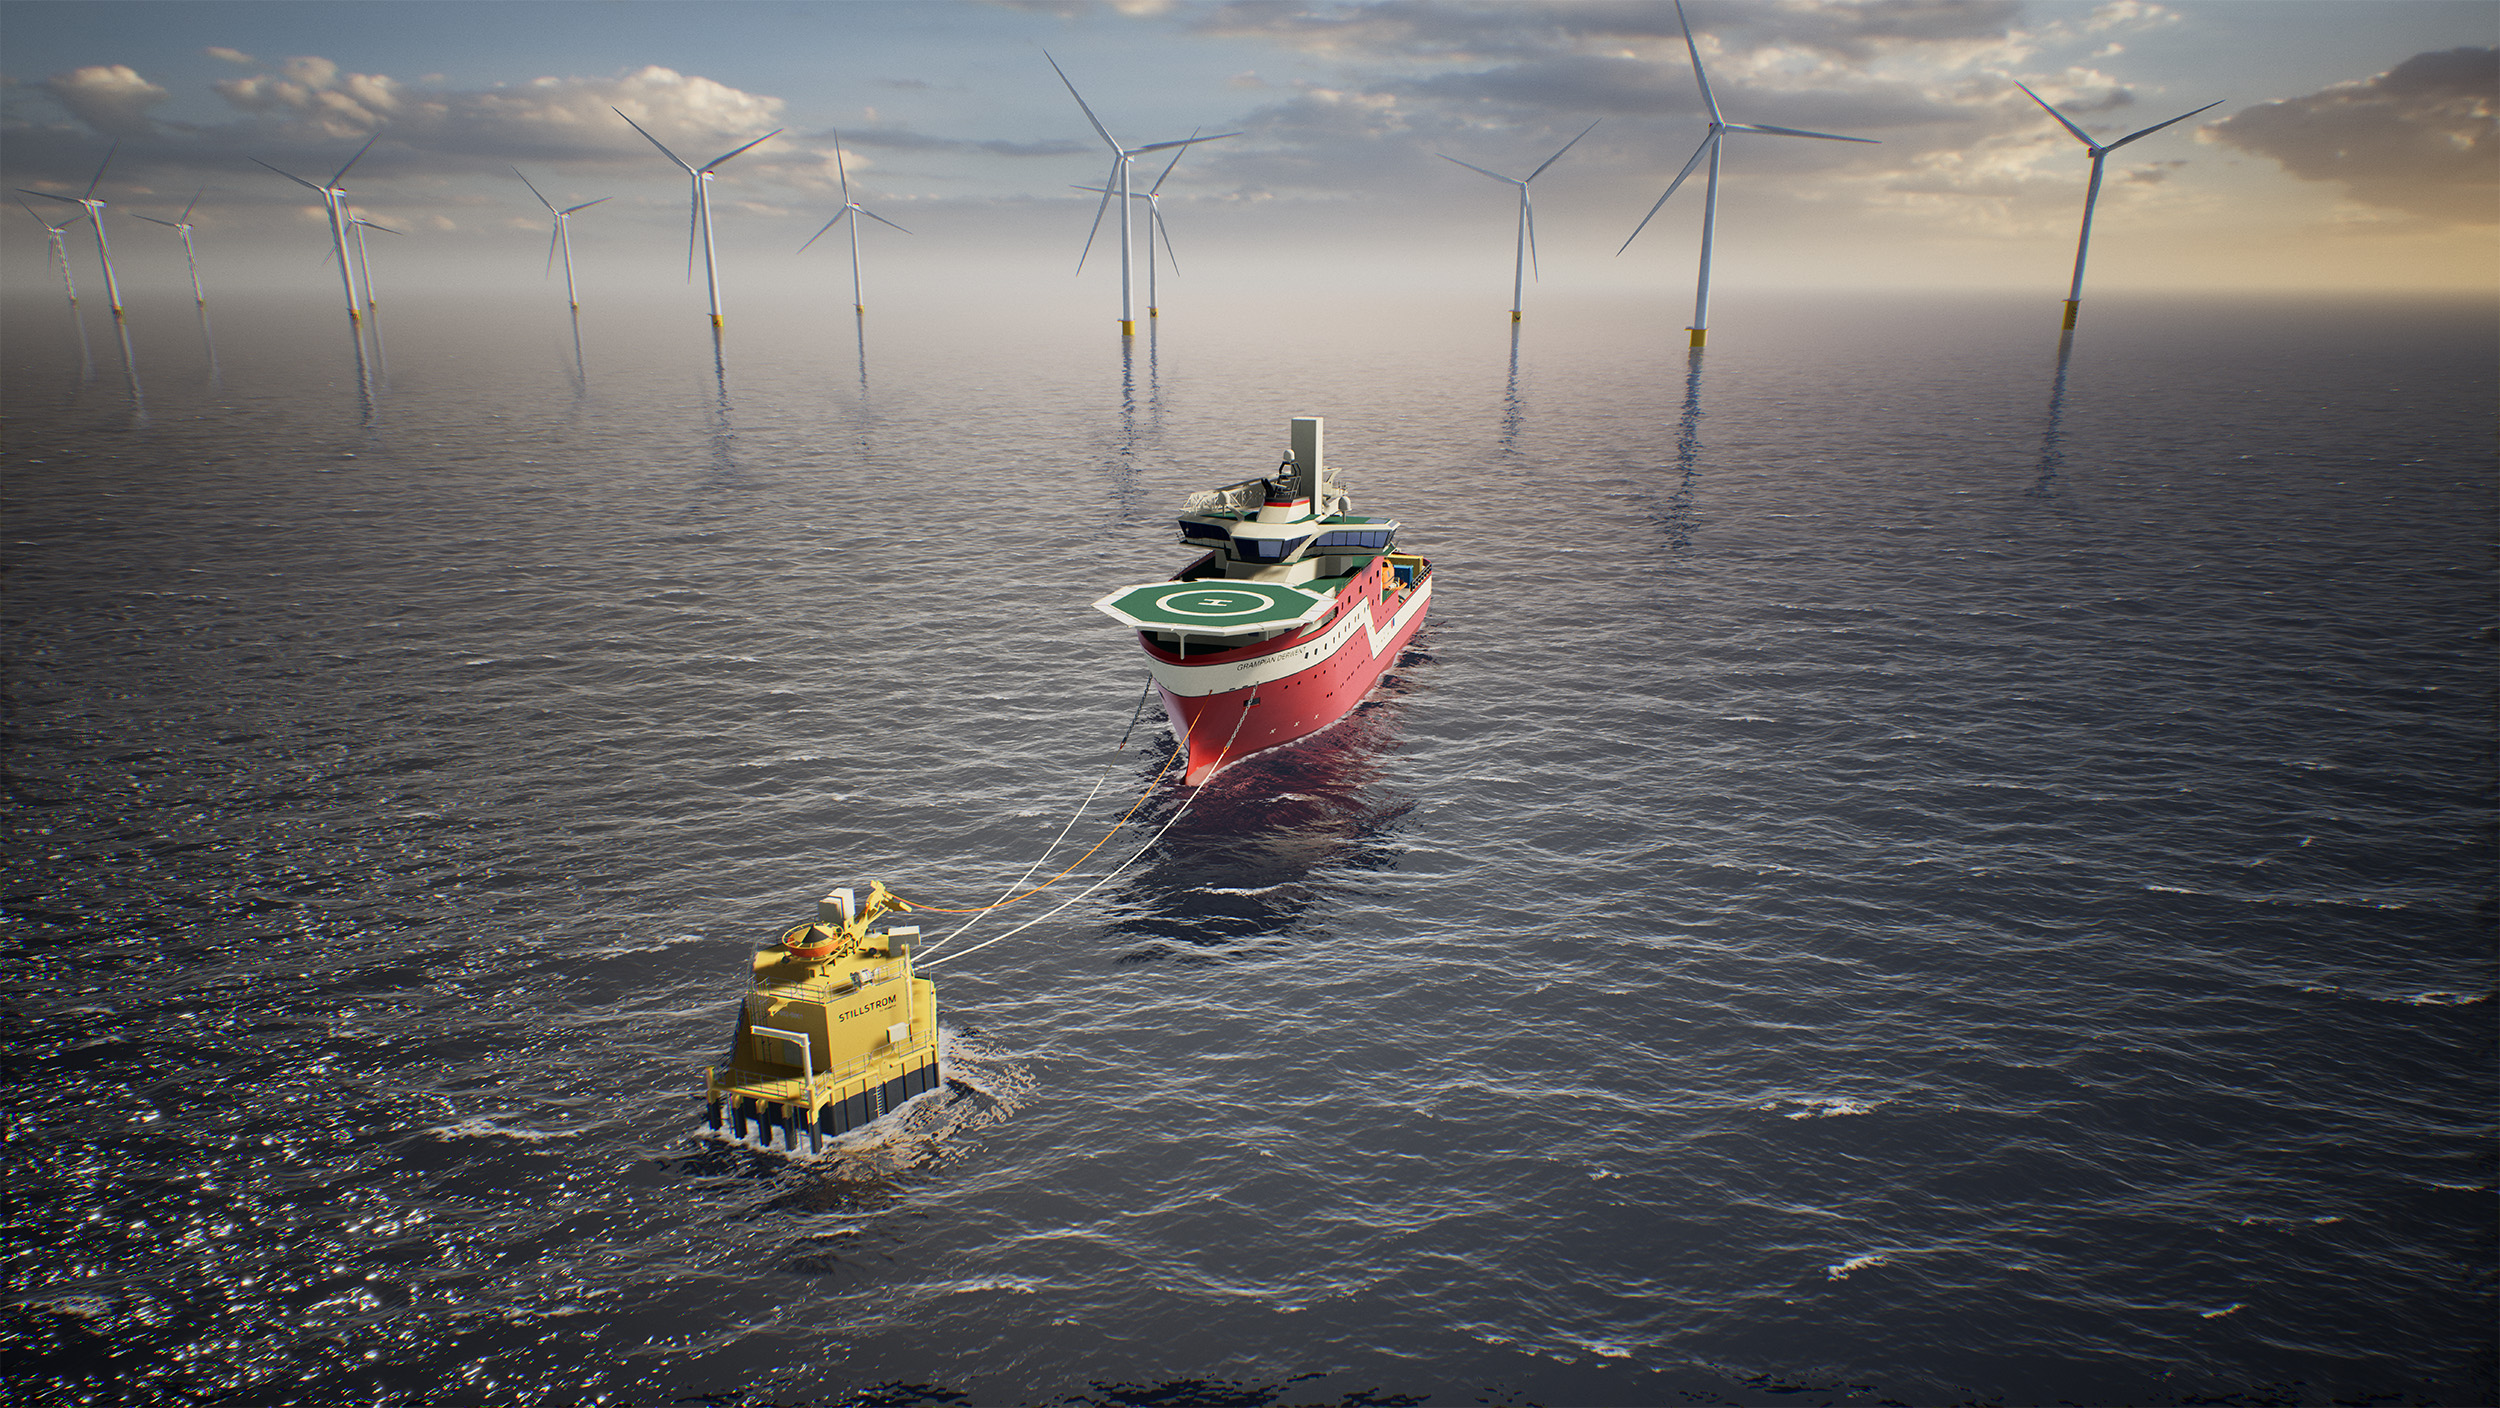 MEMBER NEWS: Stillstrom A/S and North Star join forces to accelerate vessel electrification and offshore charging in the offshore wind Industry